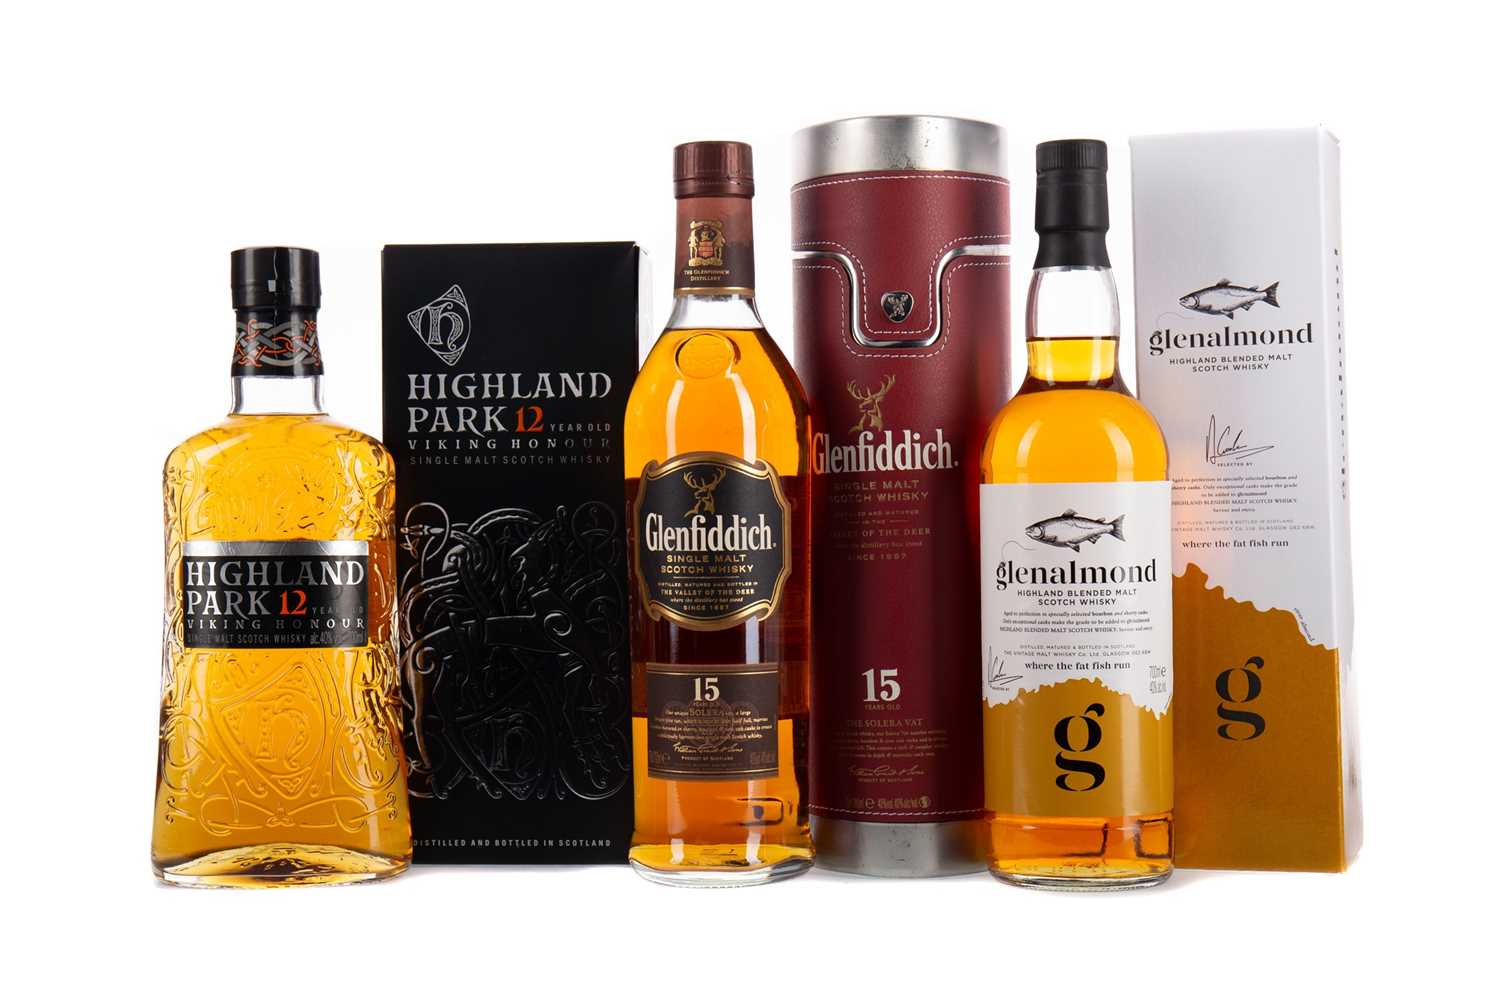 Lot 177 - HIGHLAND PARK 12 YEARS OLD, GLENFIDDICH AGED 15 YEARS, AND GLEN ALMOND